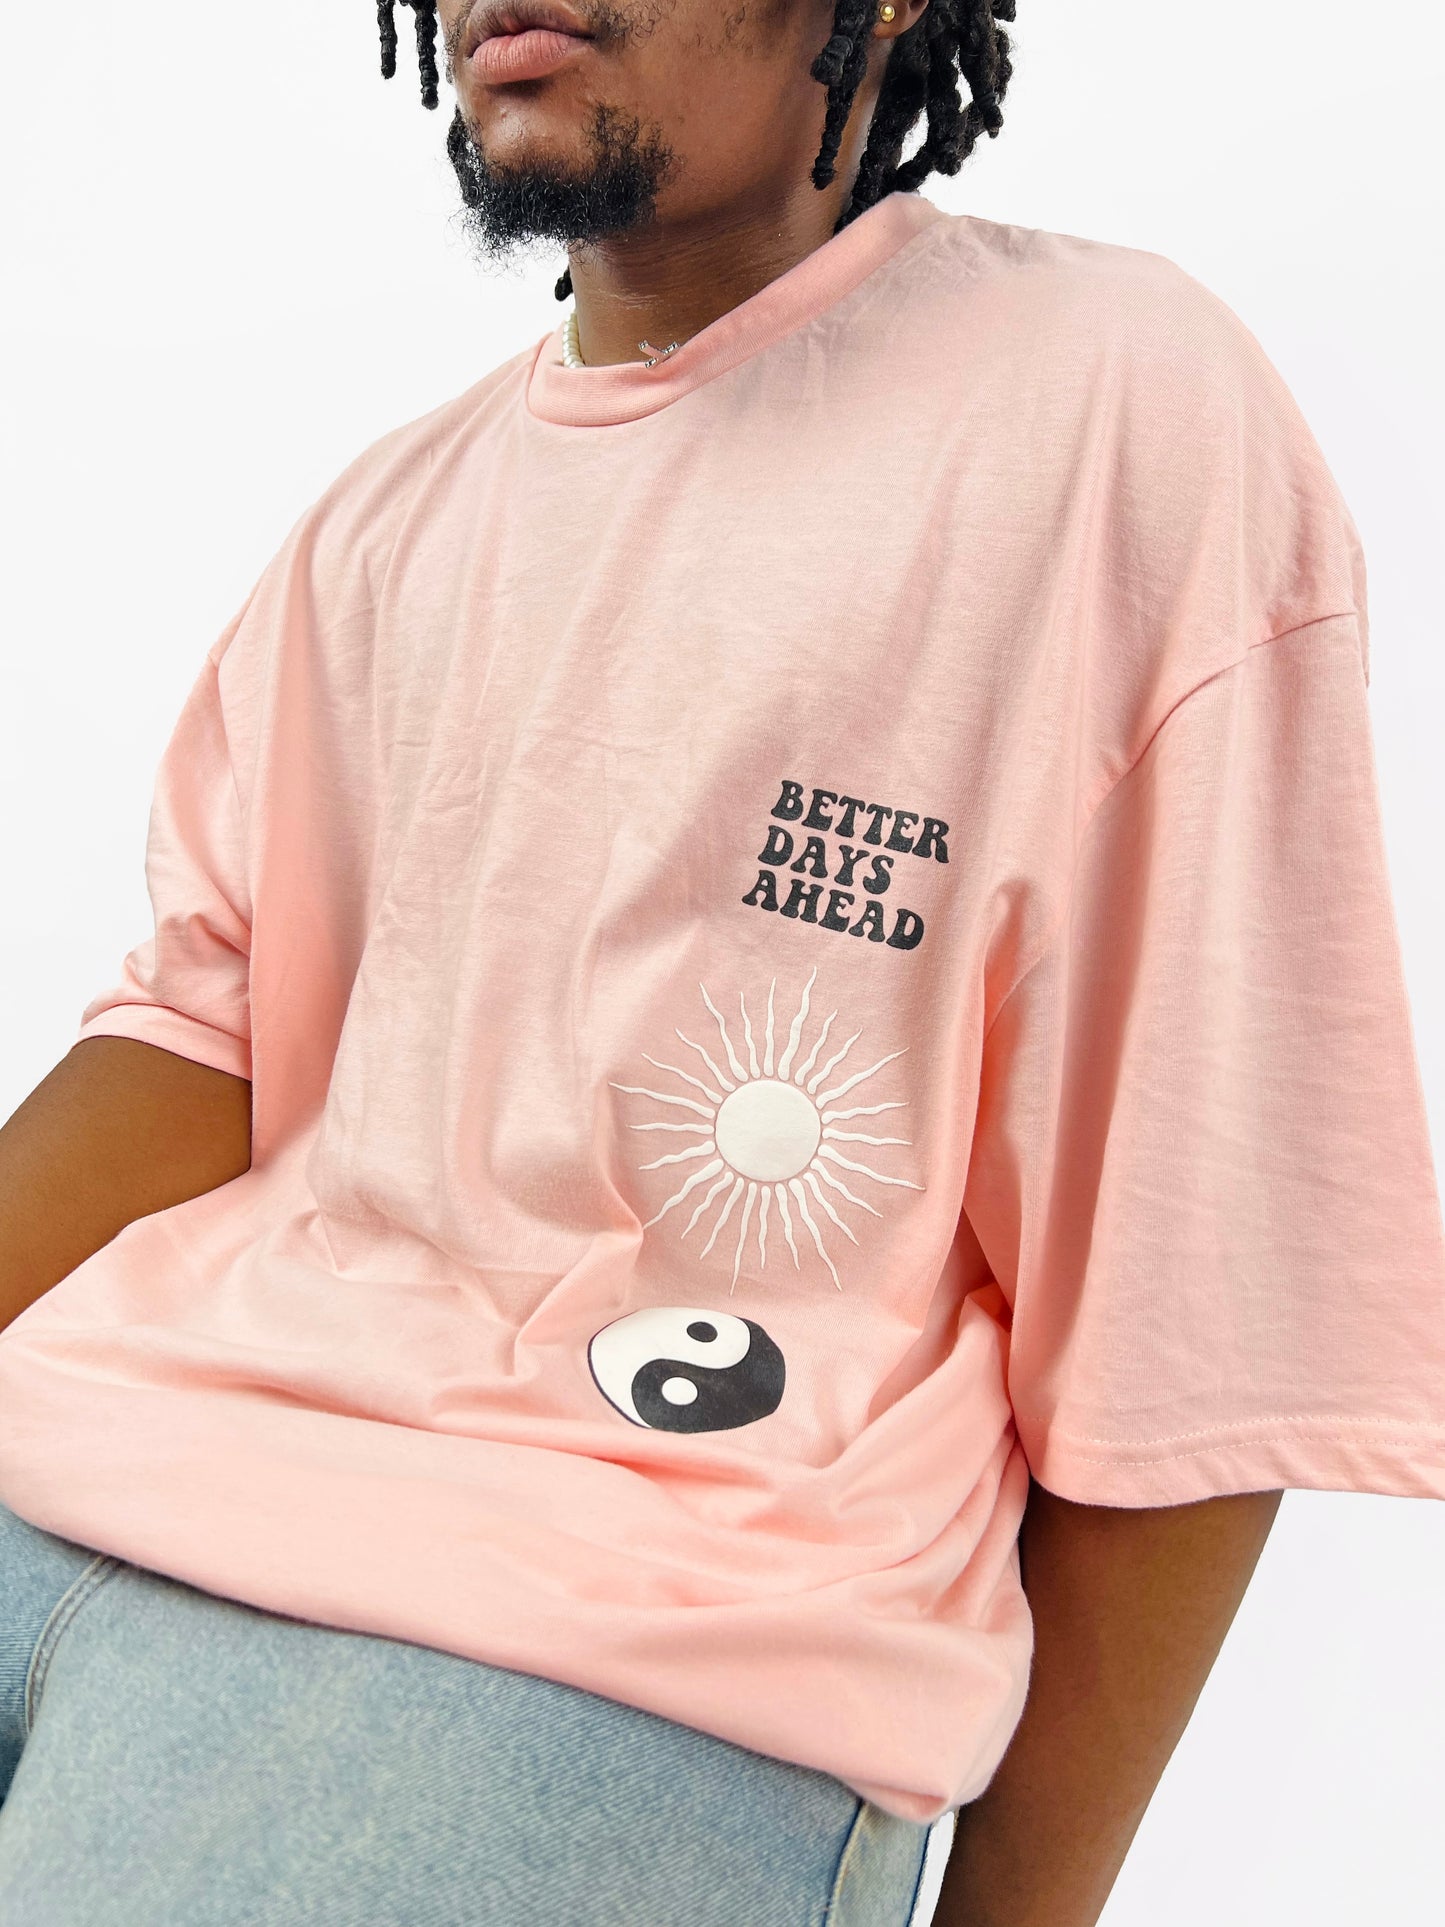 C&A Oversized Better Days Ahead print T-shirt in pink